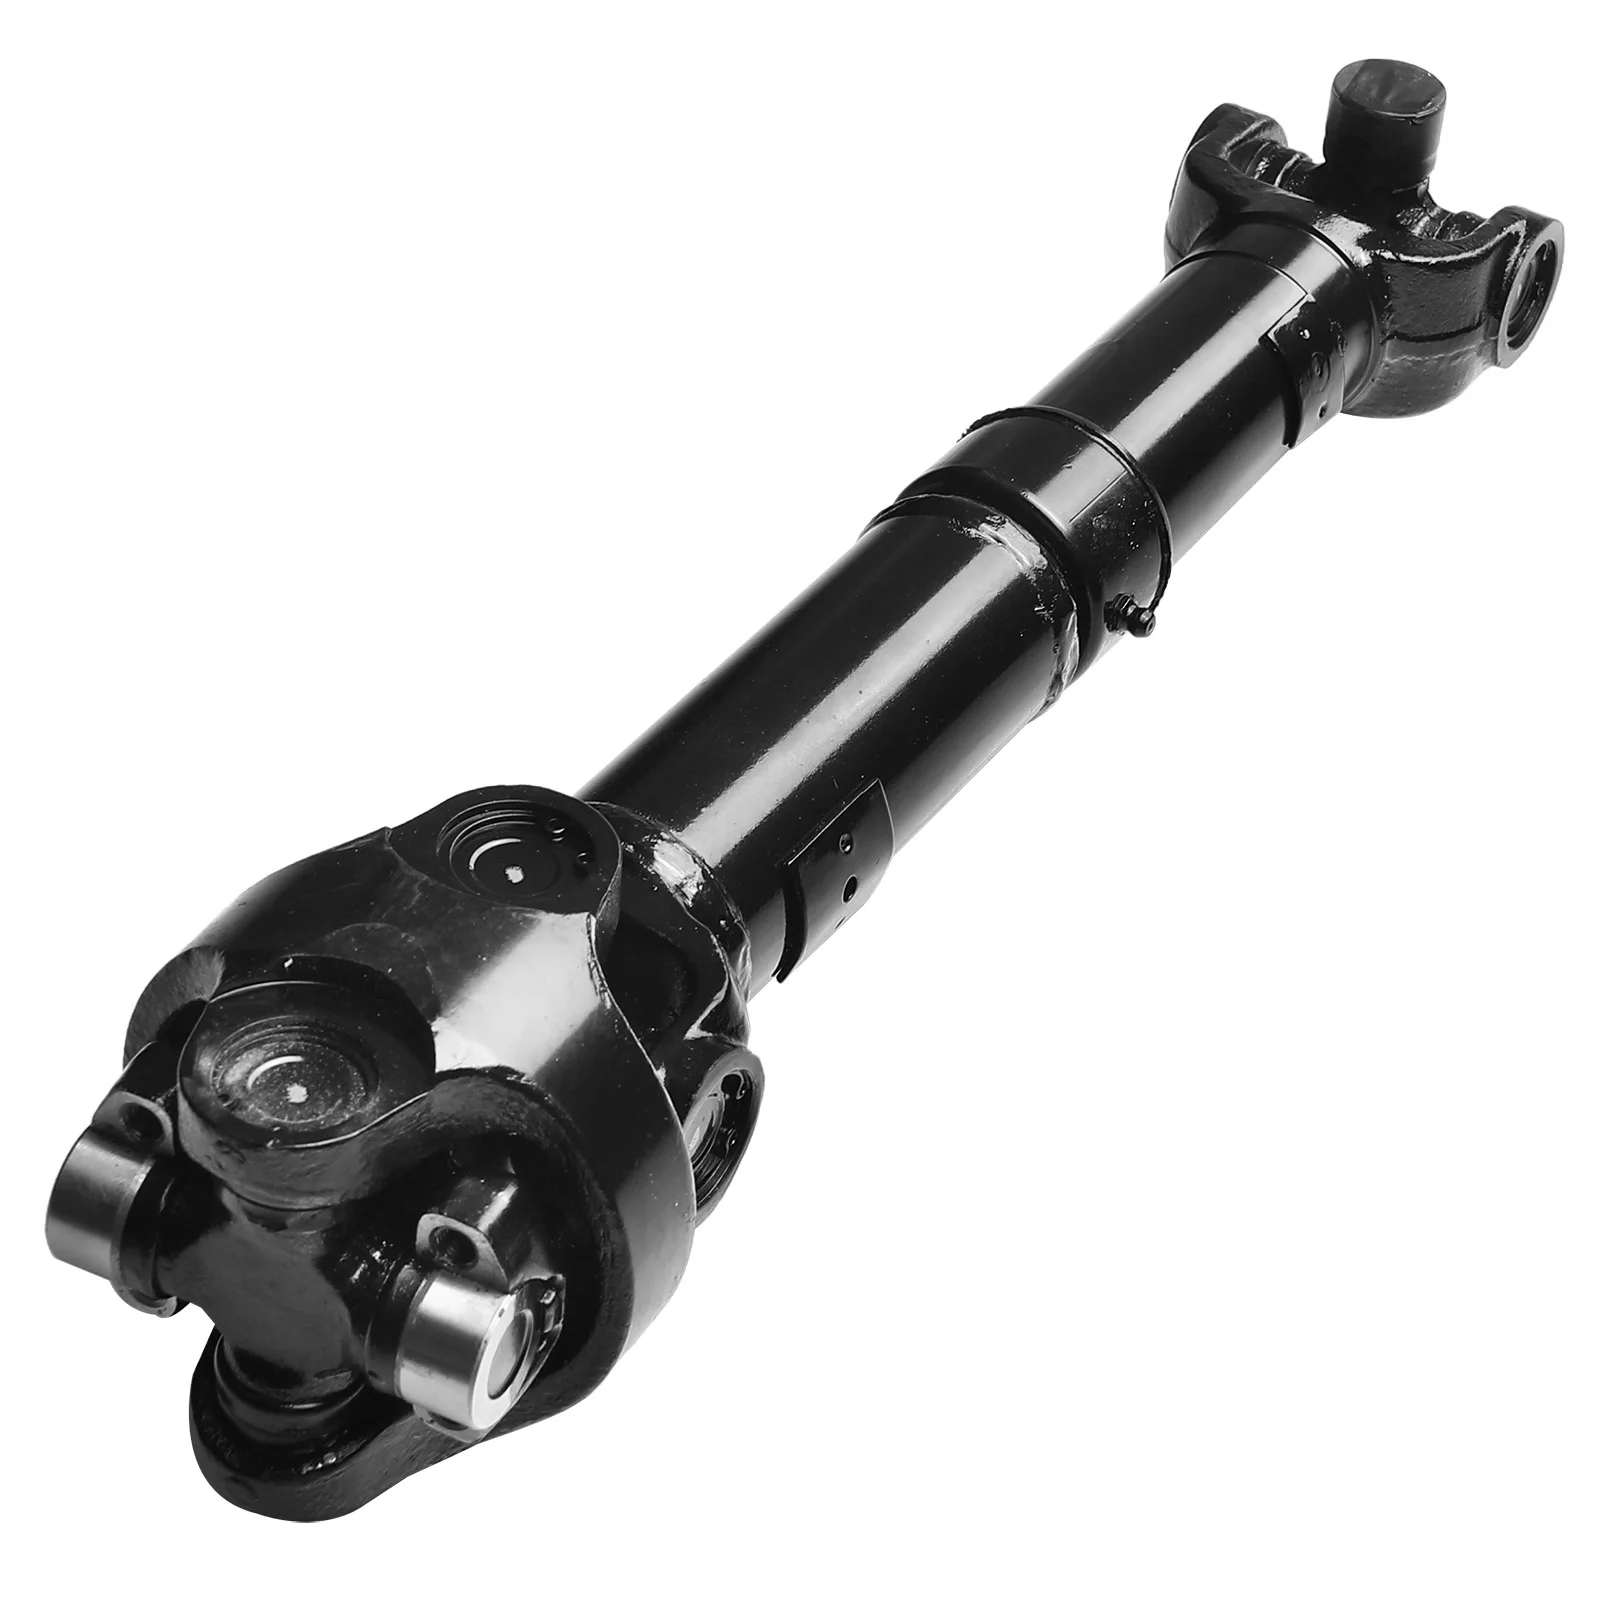 In-stock Cn Us Rear Driveshaft Prop Shaft Assembly For Jeep Wrangler 87-93  4wd 4 To 6 In. Lift 53005401 - Buy 53005401 Product on 